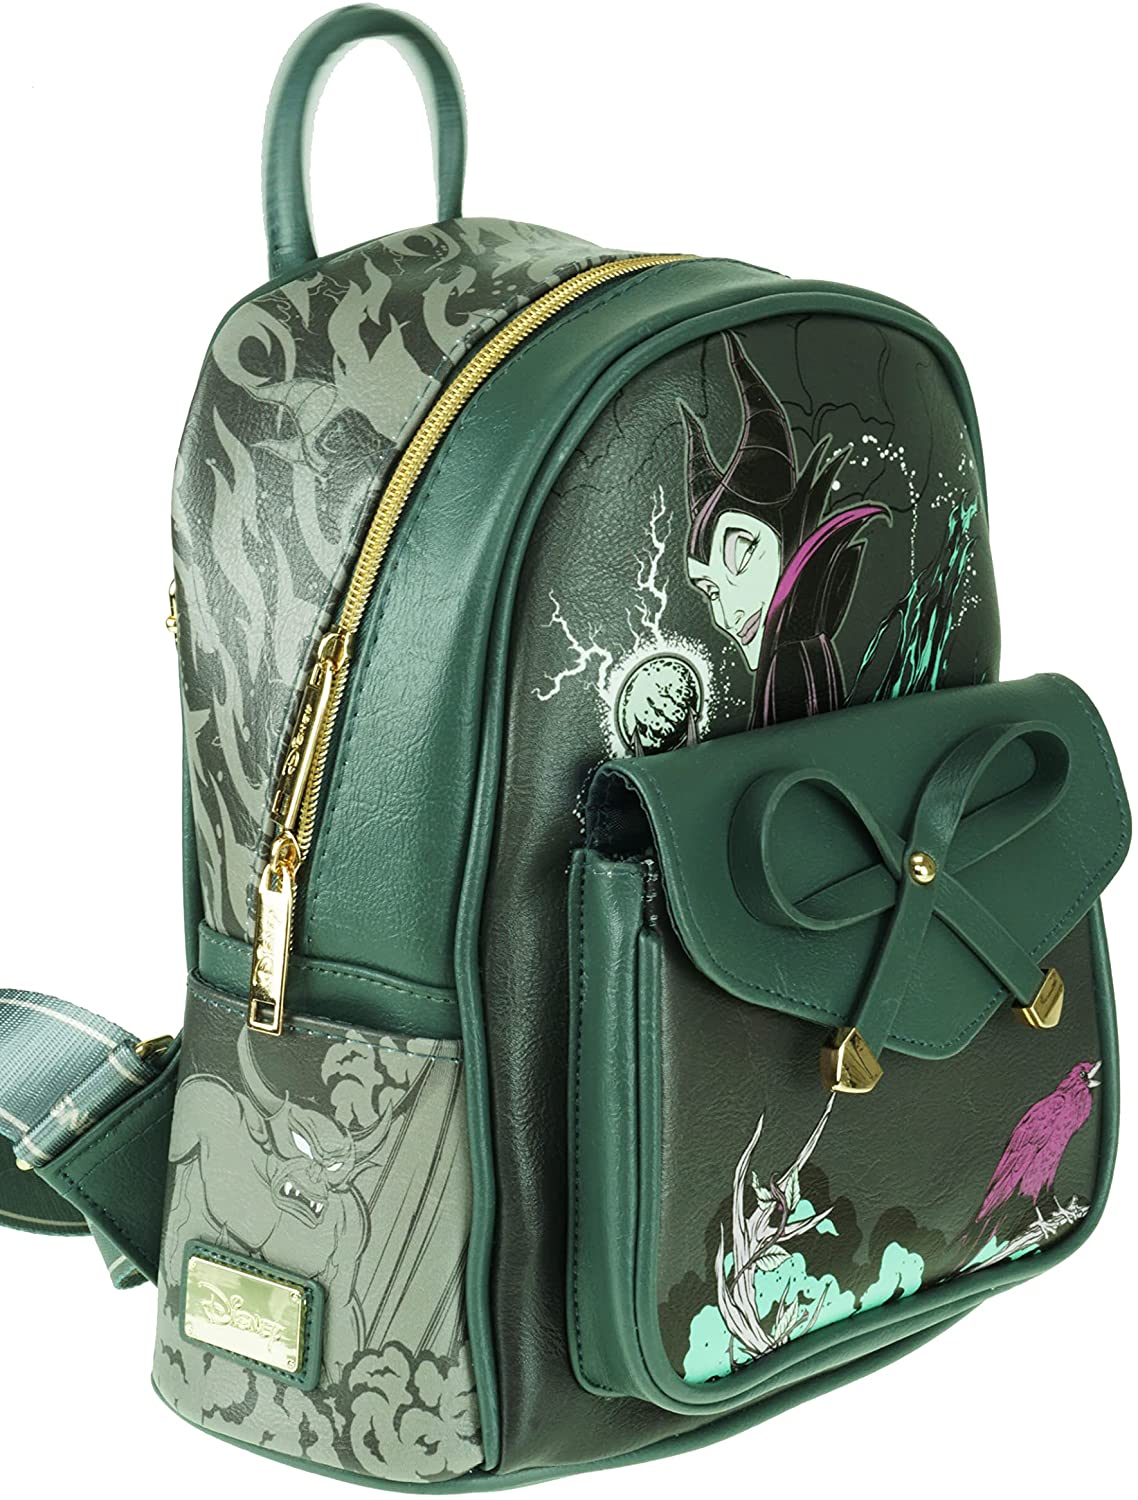 Villains - Maleficent 11" Vegan Leather Mini Backpack - A21728 - GTE Zone